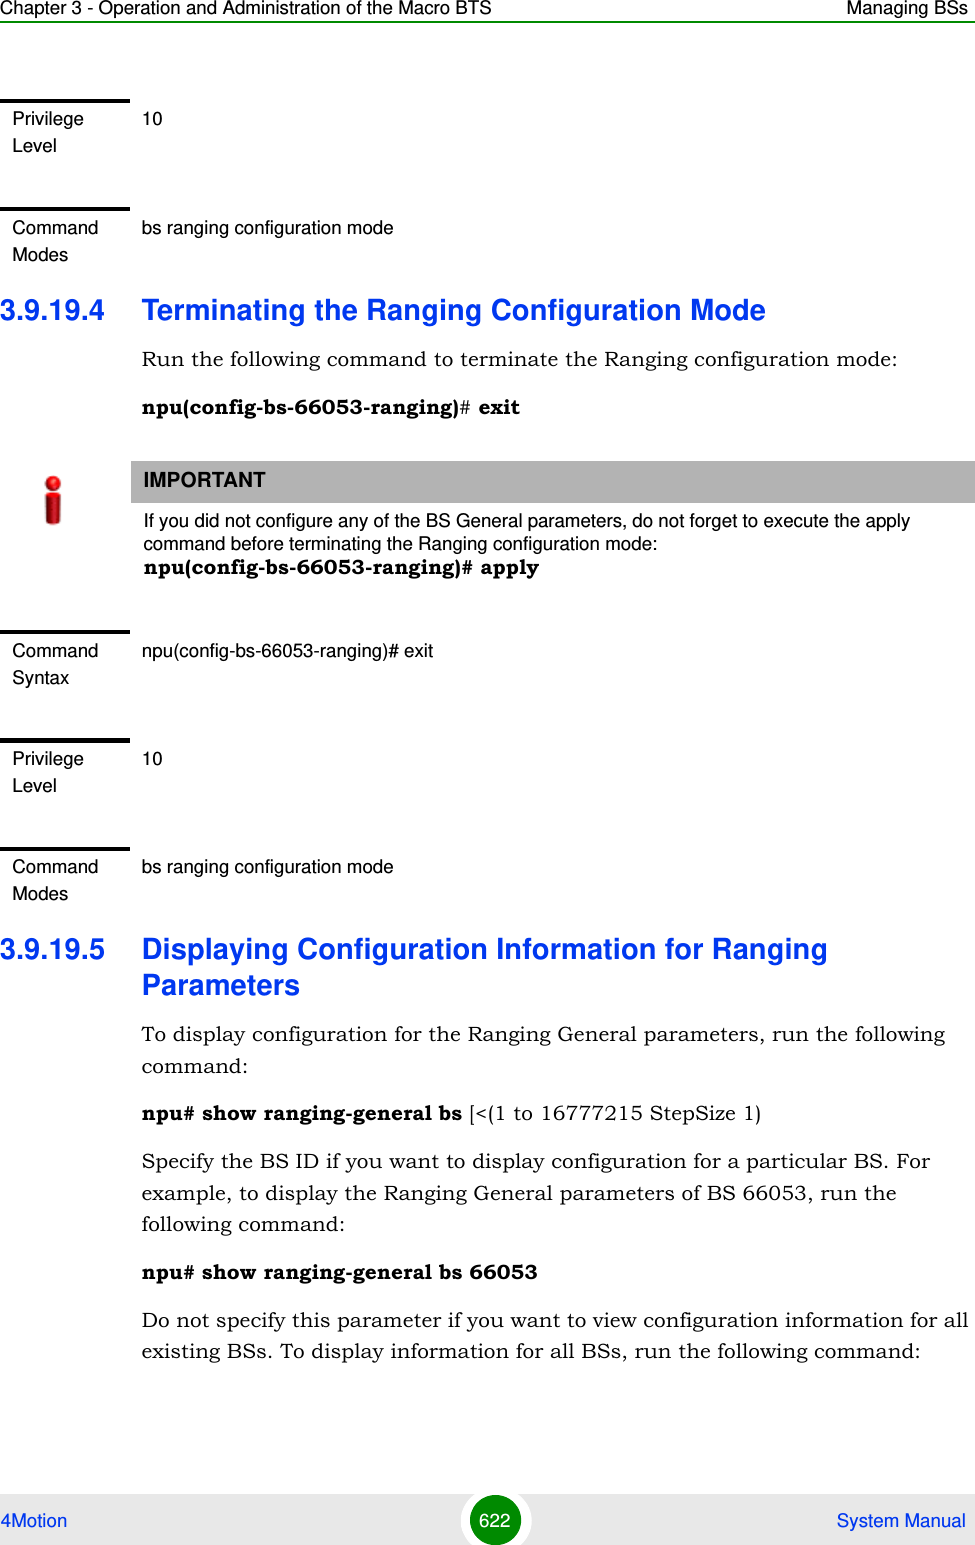 Chapter 3 - Operation and Administration of the Macro BTS Managing BSs4Motion 622  System Manual3.9.19.4 Terminating the Ranging Configuration ModeRun the following command to terminate the Ranging configuration mode:npu(config-bs-66053-ranging)# exit3.9.19.5 Displaying Configuration Information for Ranging ParametersTo display configuration for the Ranging General parameters, run the following command:npu# show ranging-general bs [&lt;(1 to 16777215 StepSize 1)Specify the BS ID if you want to display configuration for a particular BS. For example, to display the Ranging General parameters of BS 66053, run the following command:npu# show ranging-general bs 66053Do not specify this parameter if you want to view configuration information for all existing BSs. To display information for all BSs, run the following command:Privilege Level10Command Modesbs ranging configuration mode IMPORTANTIf you did not configure any of the BS General parameters, do not forget to execute the apply command before terminating the Ranging configuration mode: npu(config-bs-66053-ranging)# applyCommand Syntaxnpu(config-bs-66053-ranging)# exitPrivilege Level10Command Modesbs ranging configuration mode